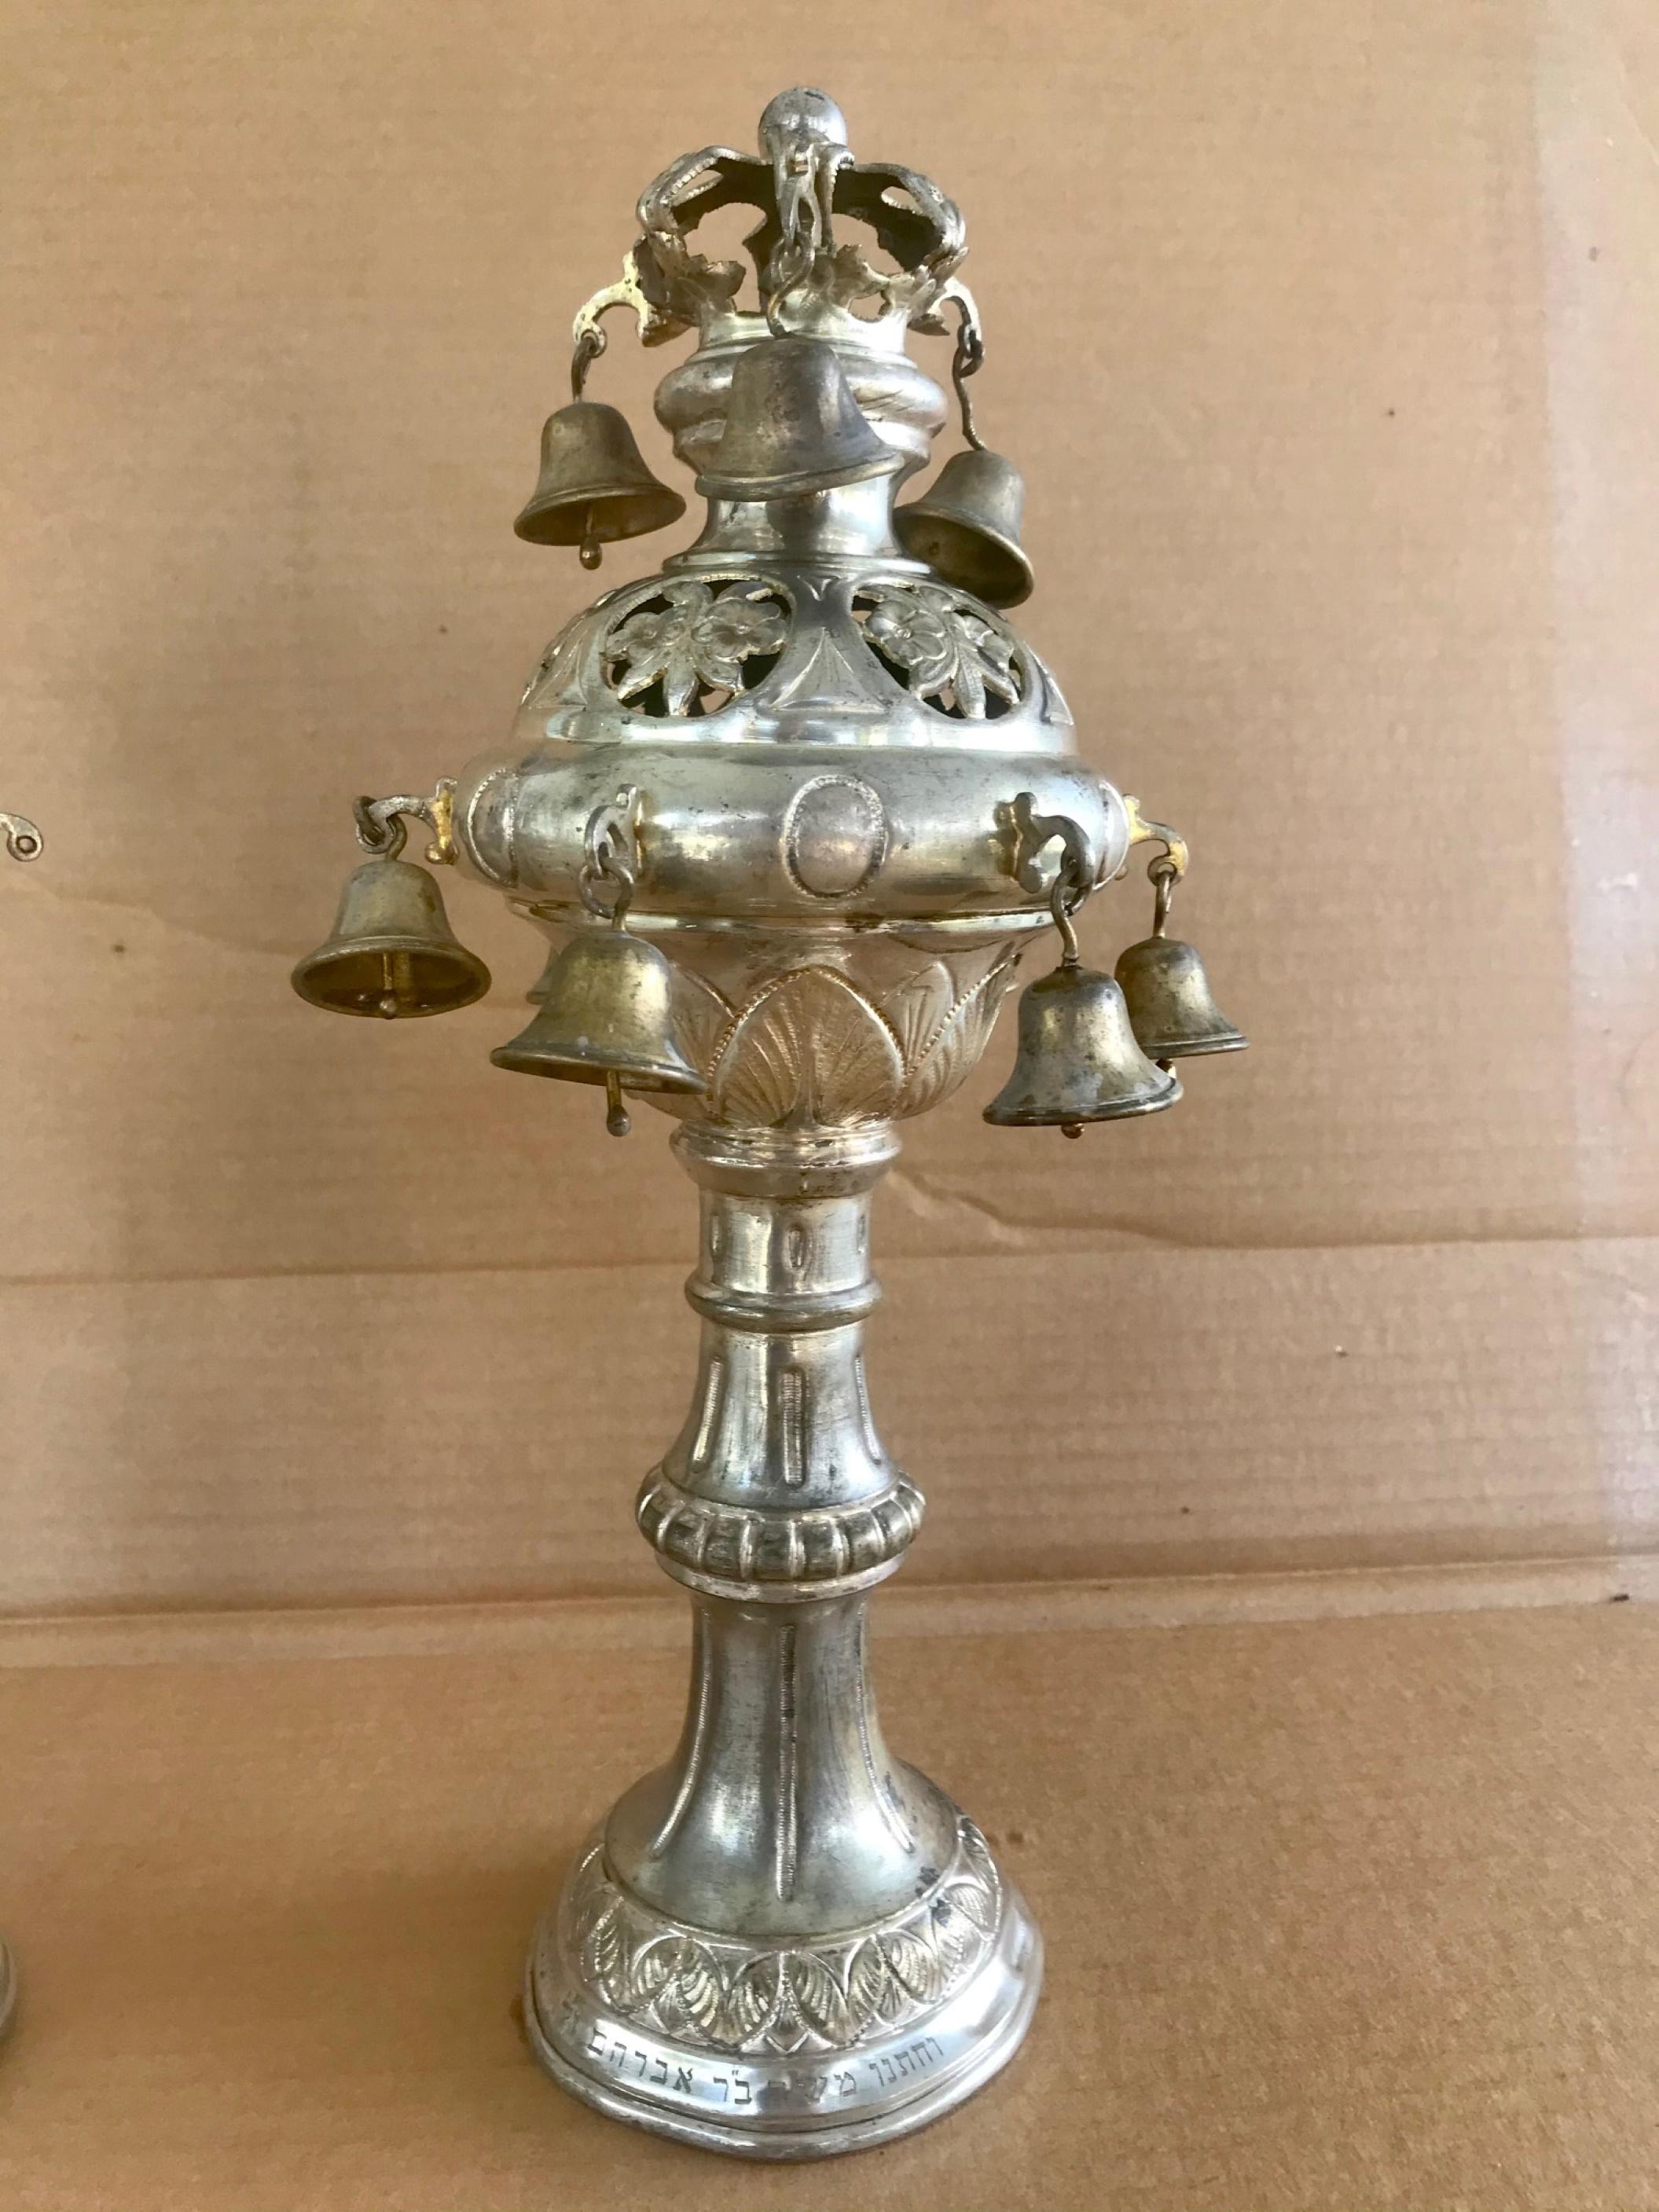 Antique original pair of silver plated brass torah finials, Rimonim

The pair of finials have bulbous stems and spherical upper sections that are hung with bells. Each is topped with a crown and knob. Delicate repoussé and engraved designs mark